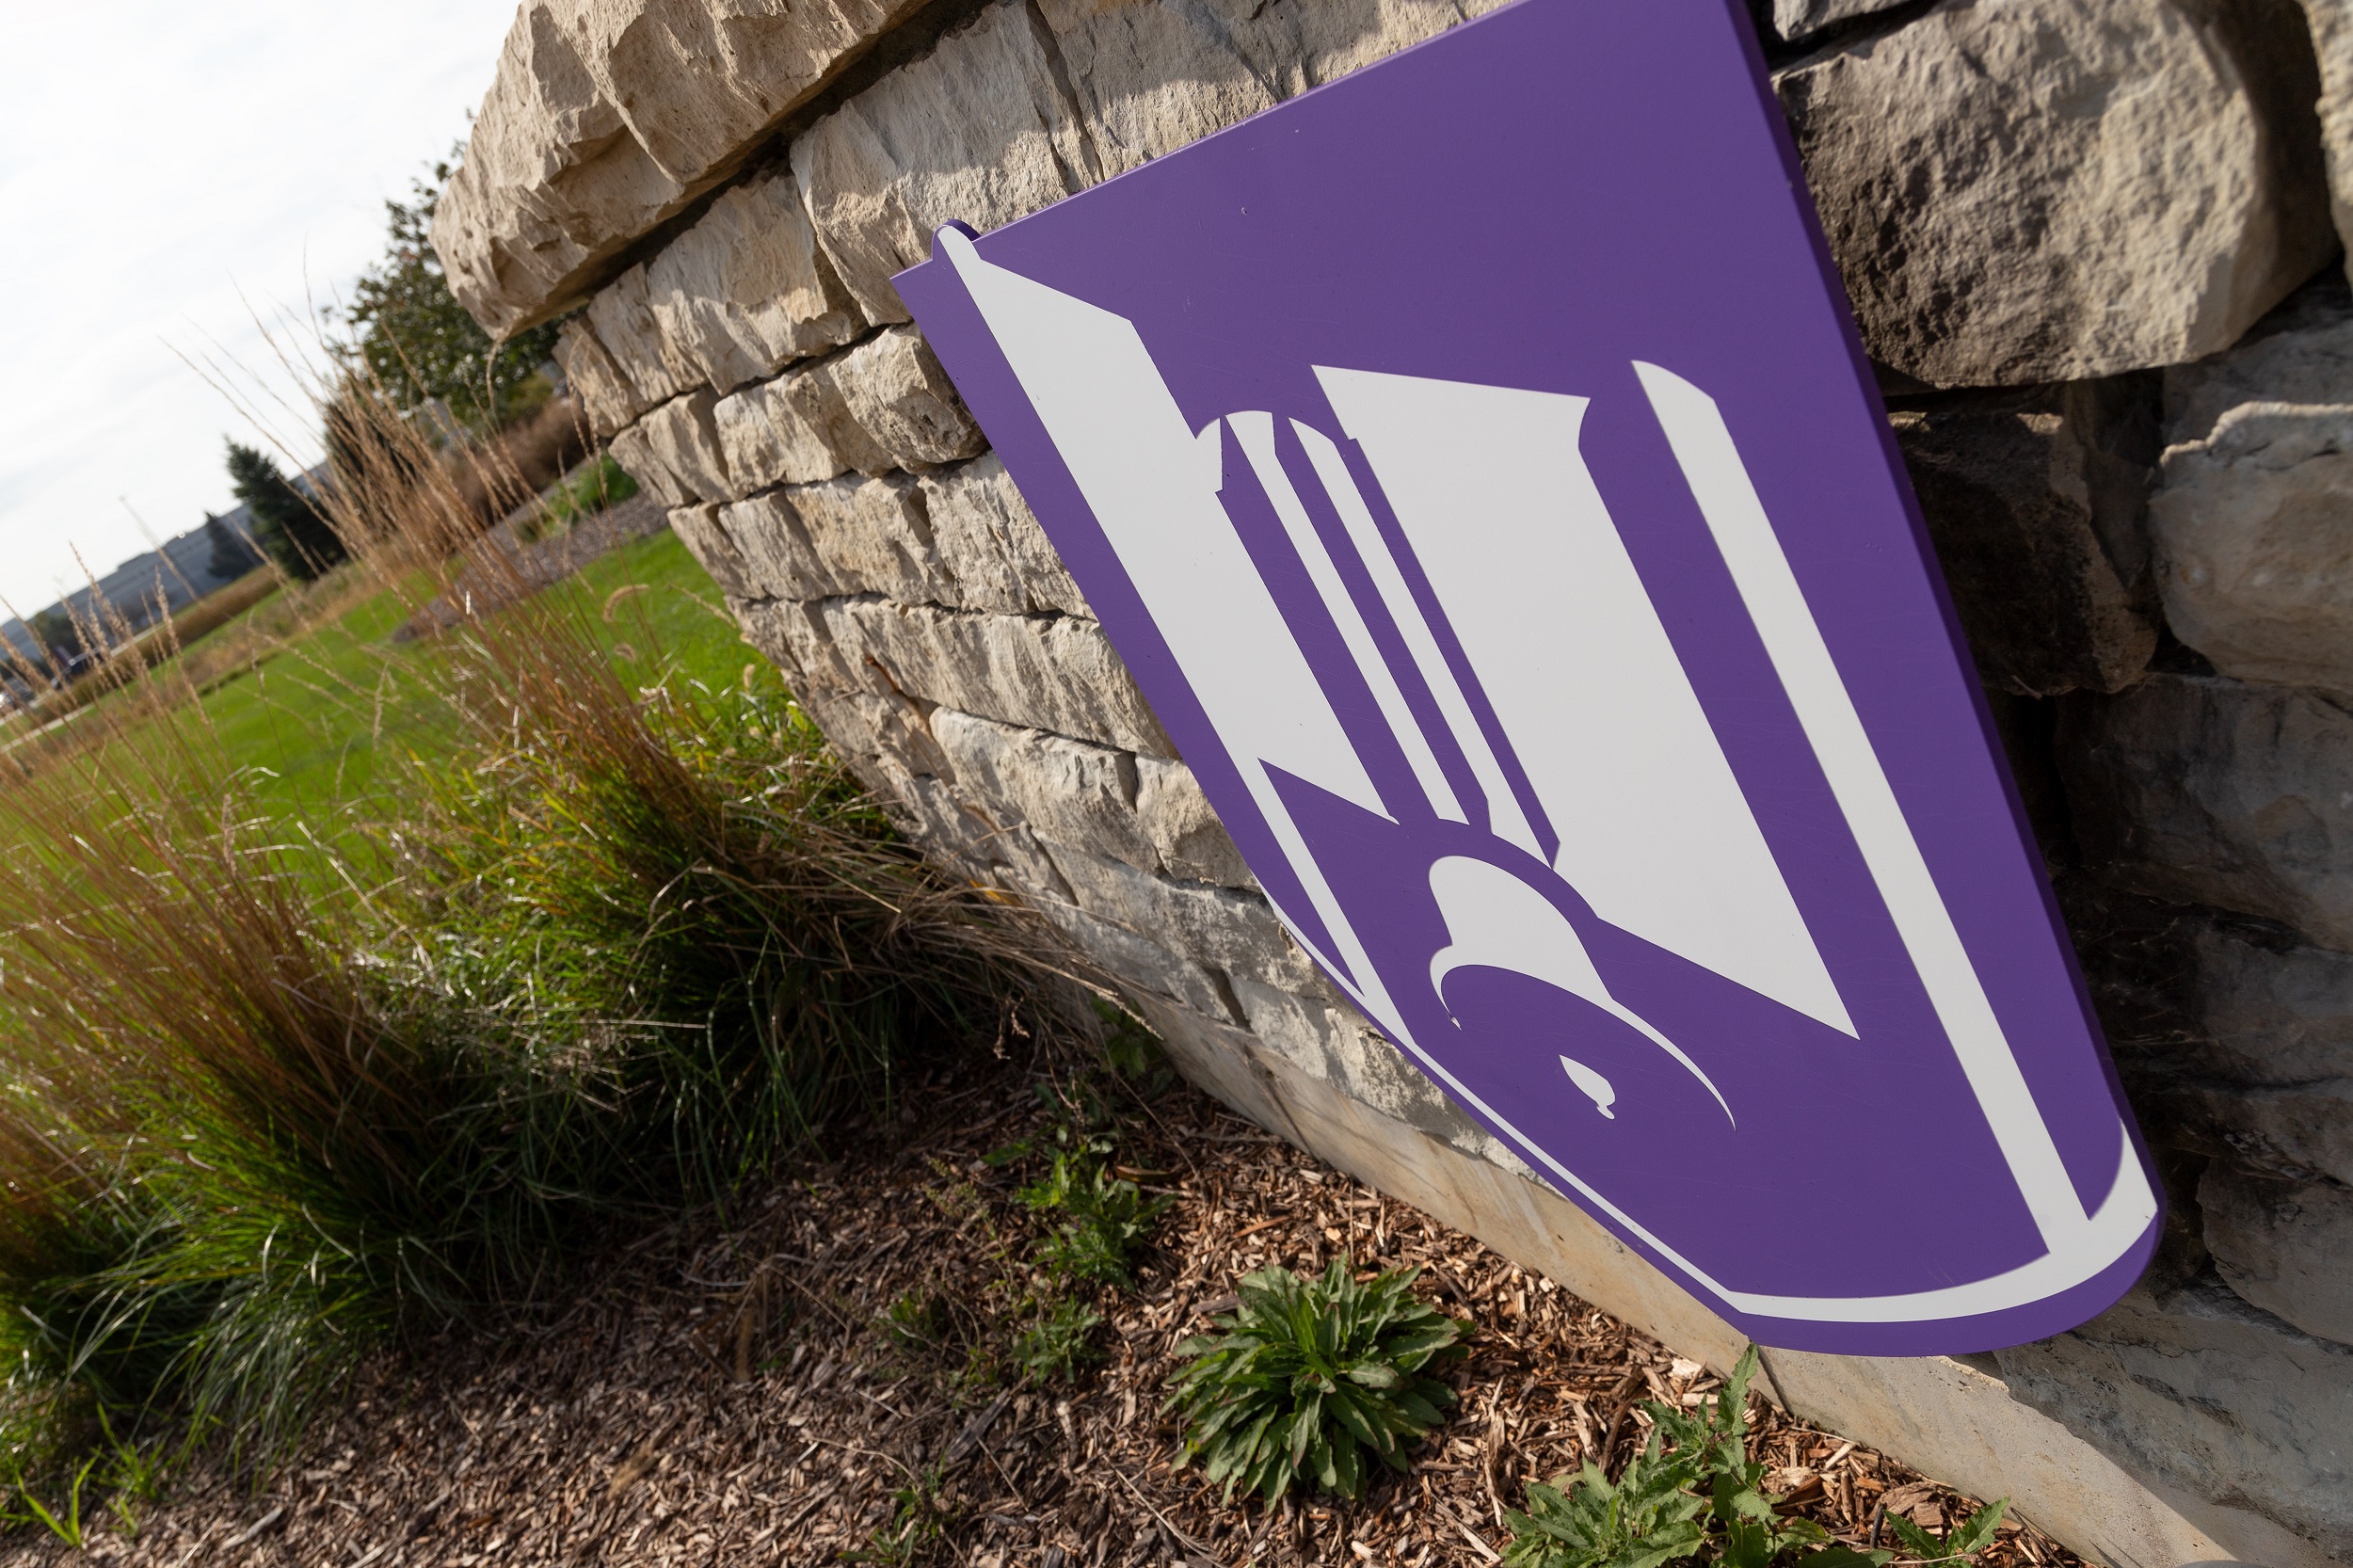 Main Campus front sign - Shield